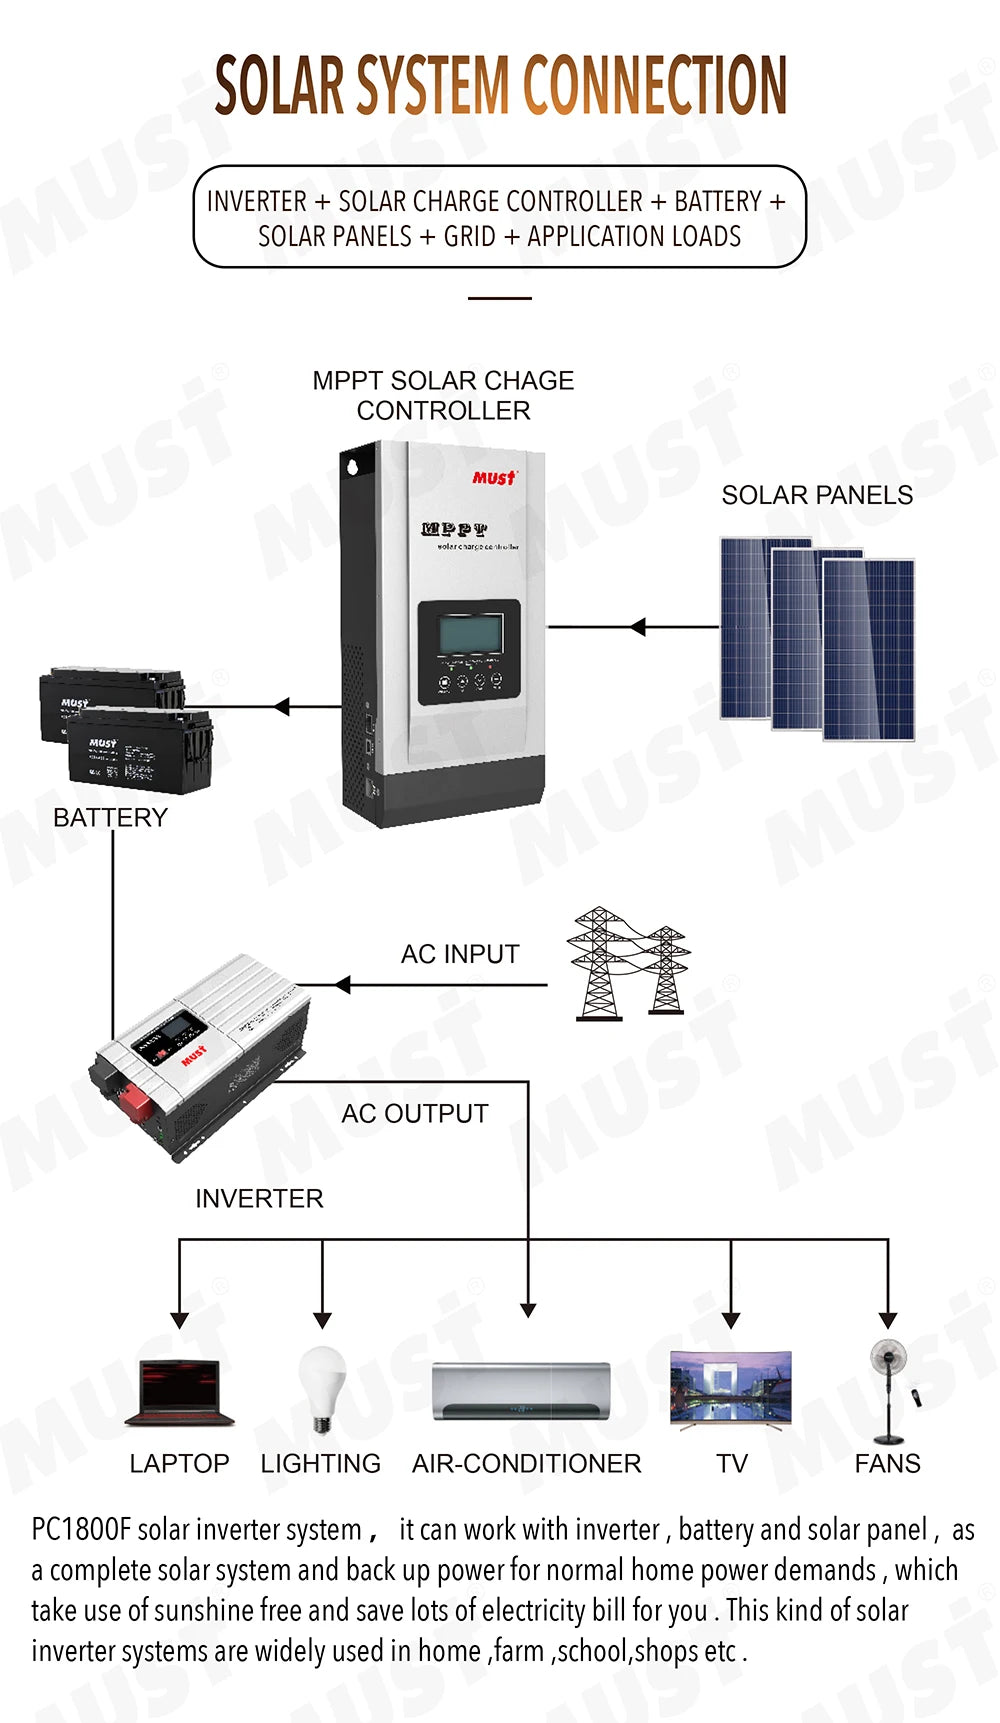 60A 80A 100A MUST MPPT Solar Charge Controller, Complete solar system with MPPT charge controller, inverter, battery, and panels for off-grid power and energy harvesting.